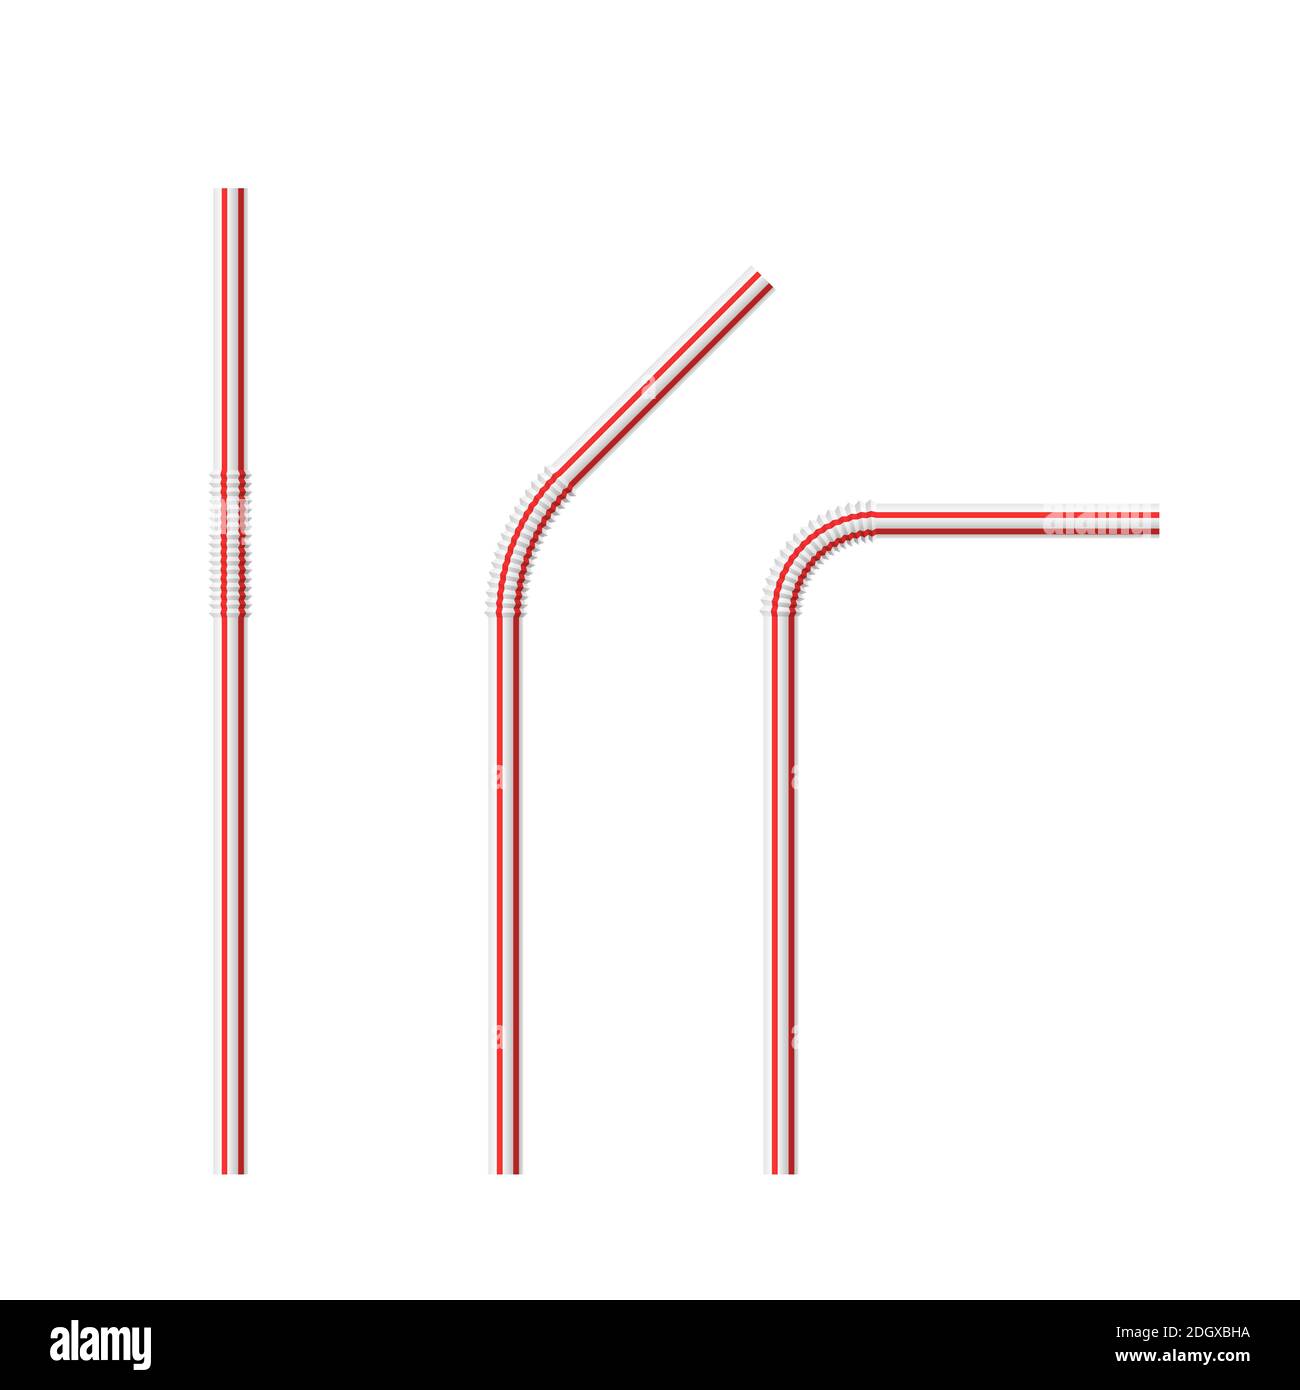 Vector realistic drinking straws striped for milk drinks, cocktails or alcohol. Set of white-red drinking straws isolated with various bends. Template Stock Vector